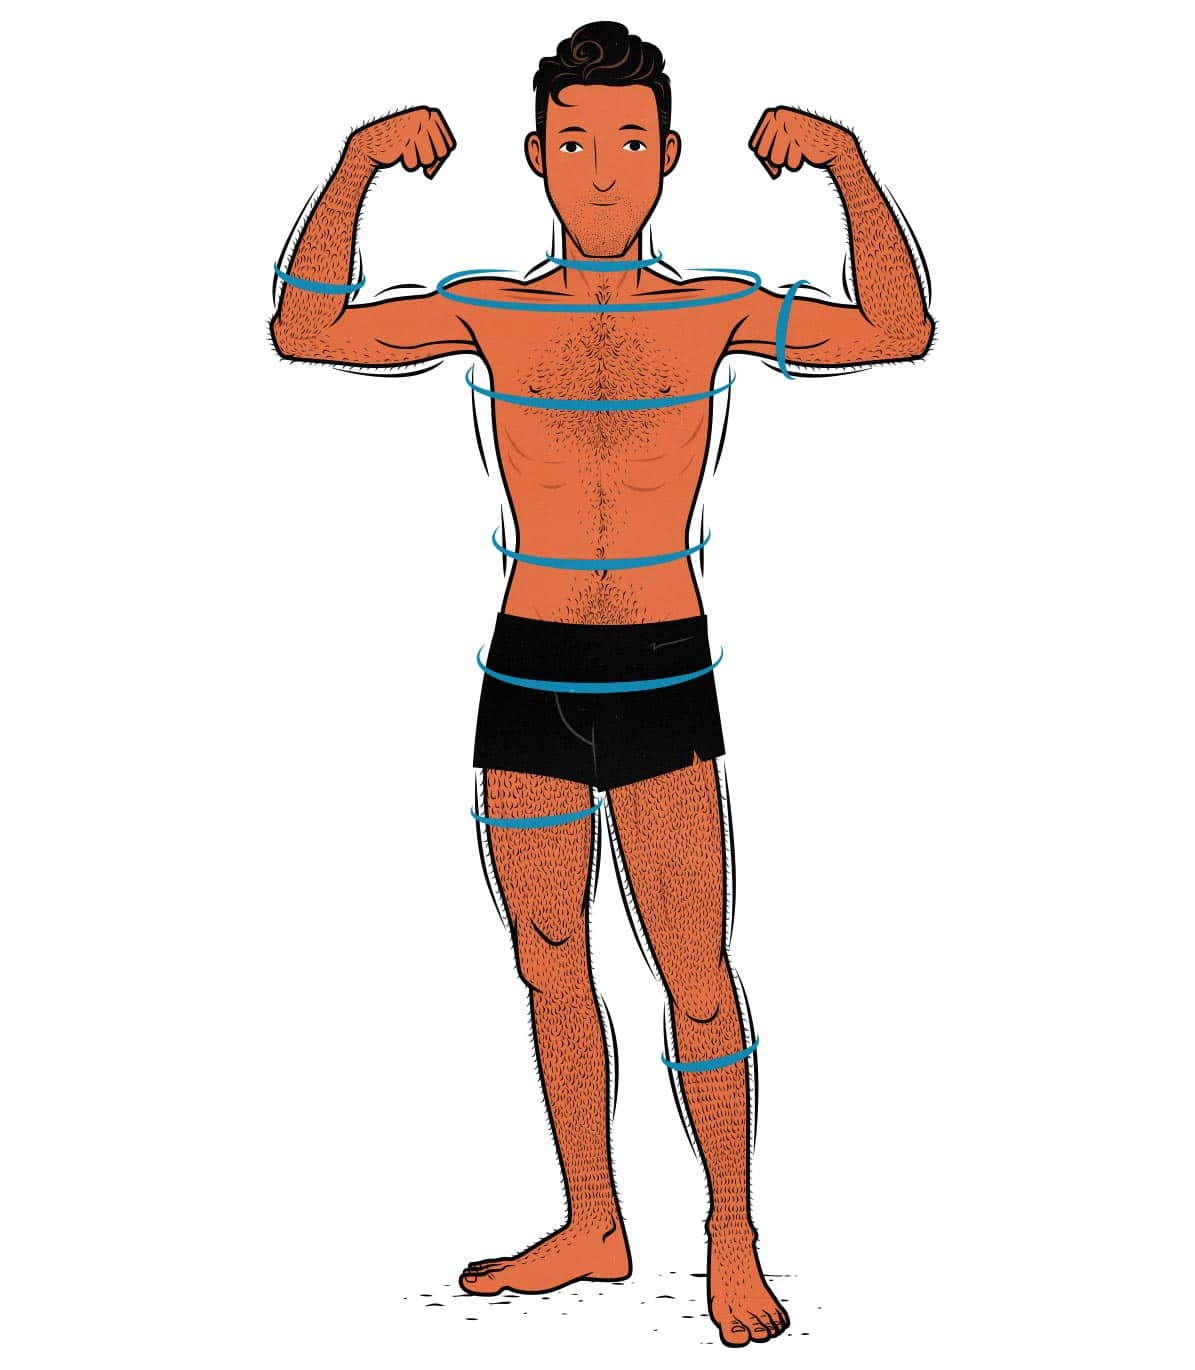 Illustration of a skinny guy measuring his muscle growth while bulking. Illustrated by Shane Duquette.